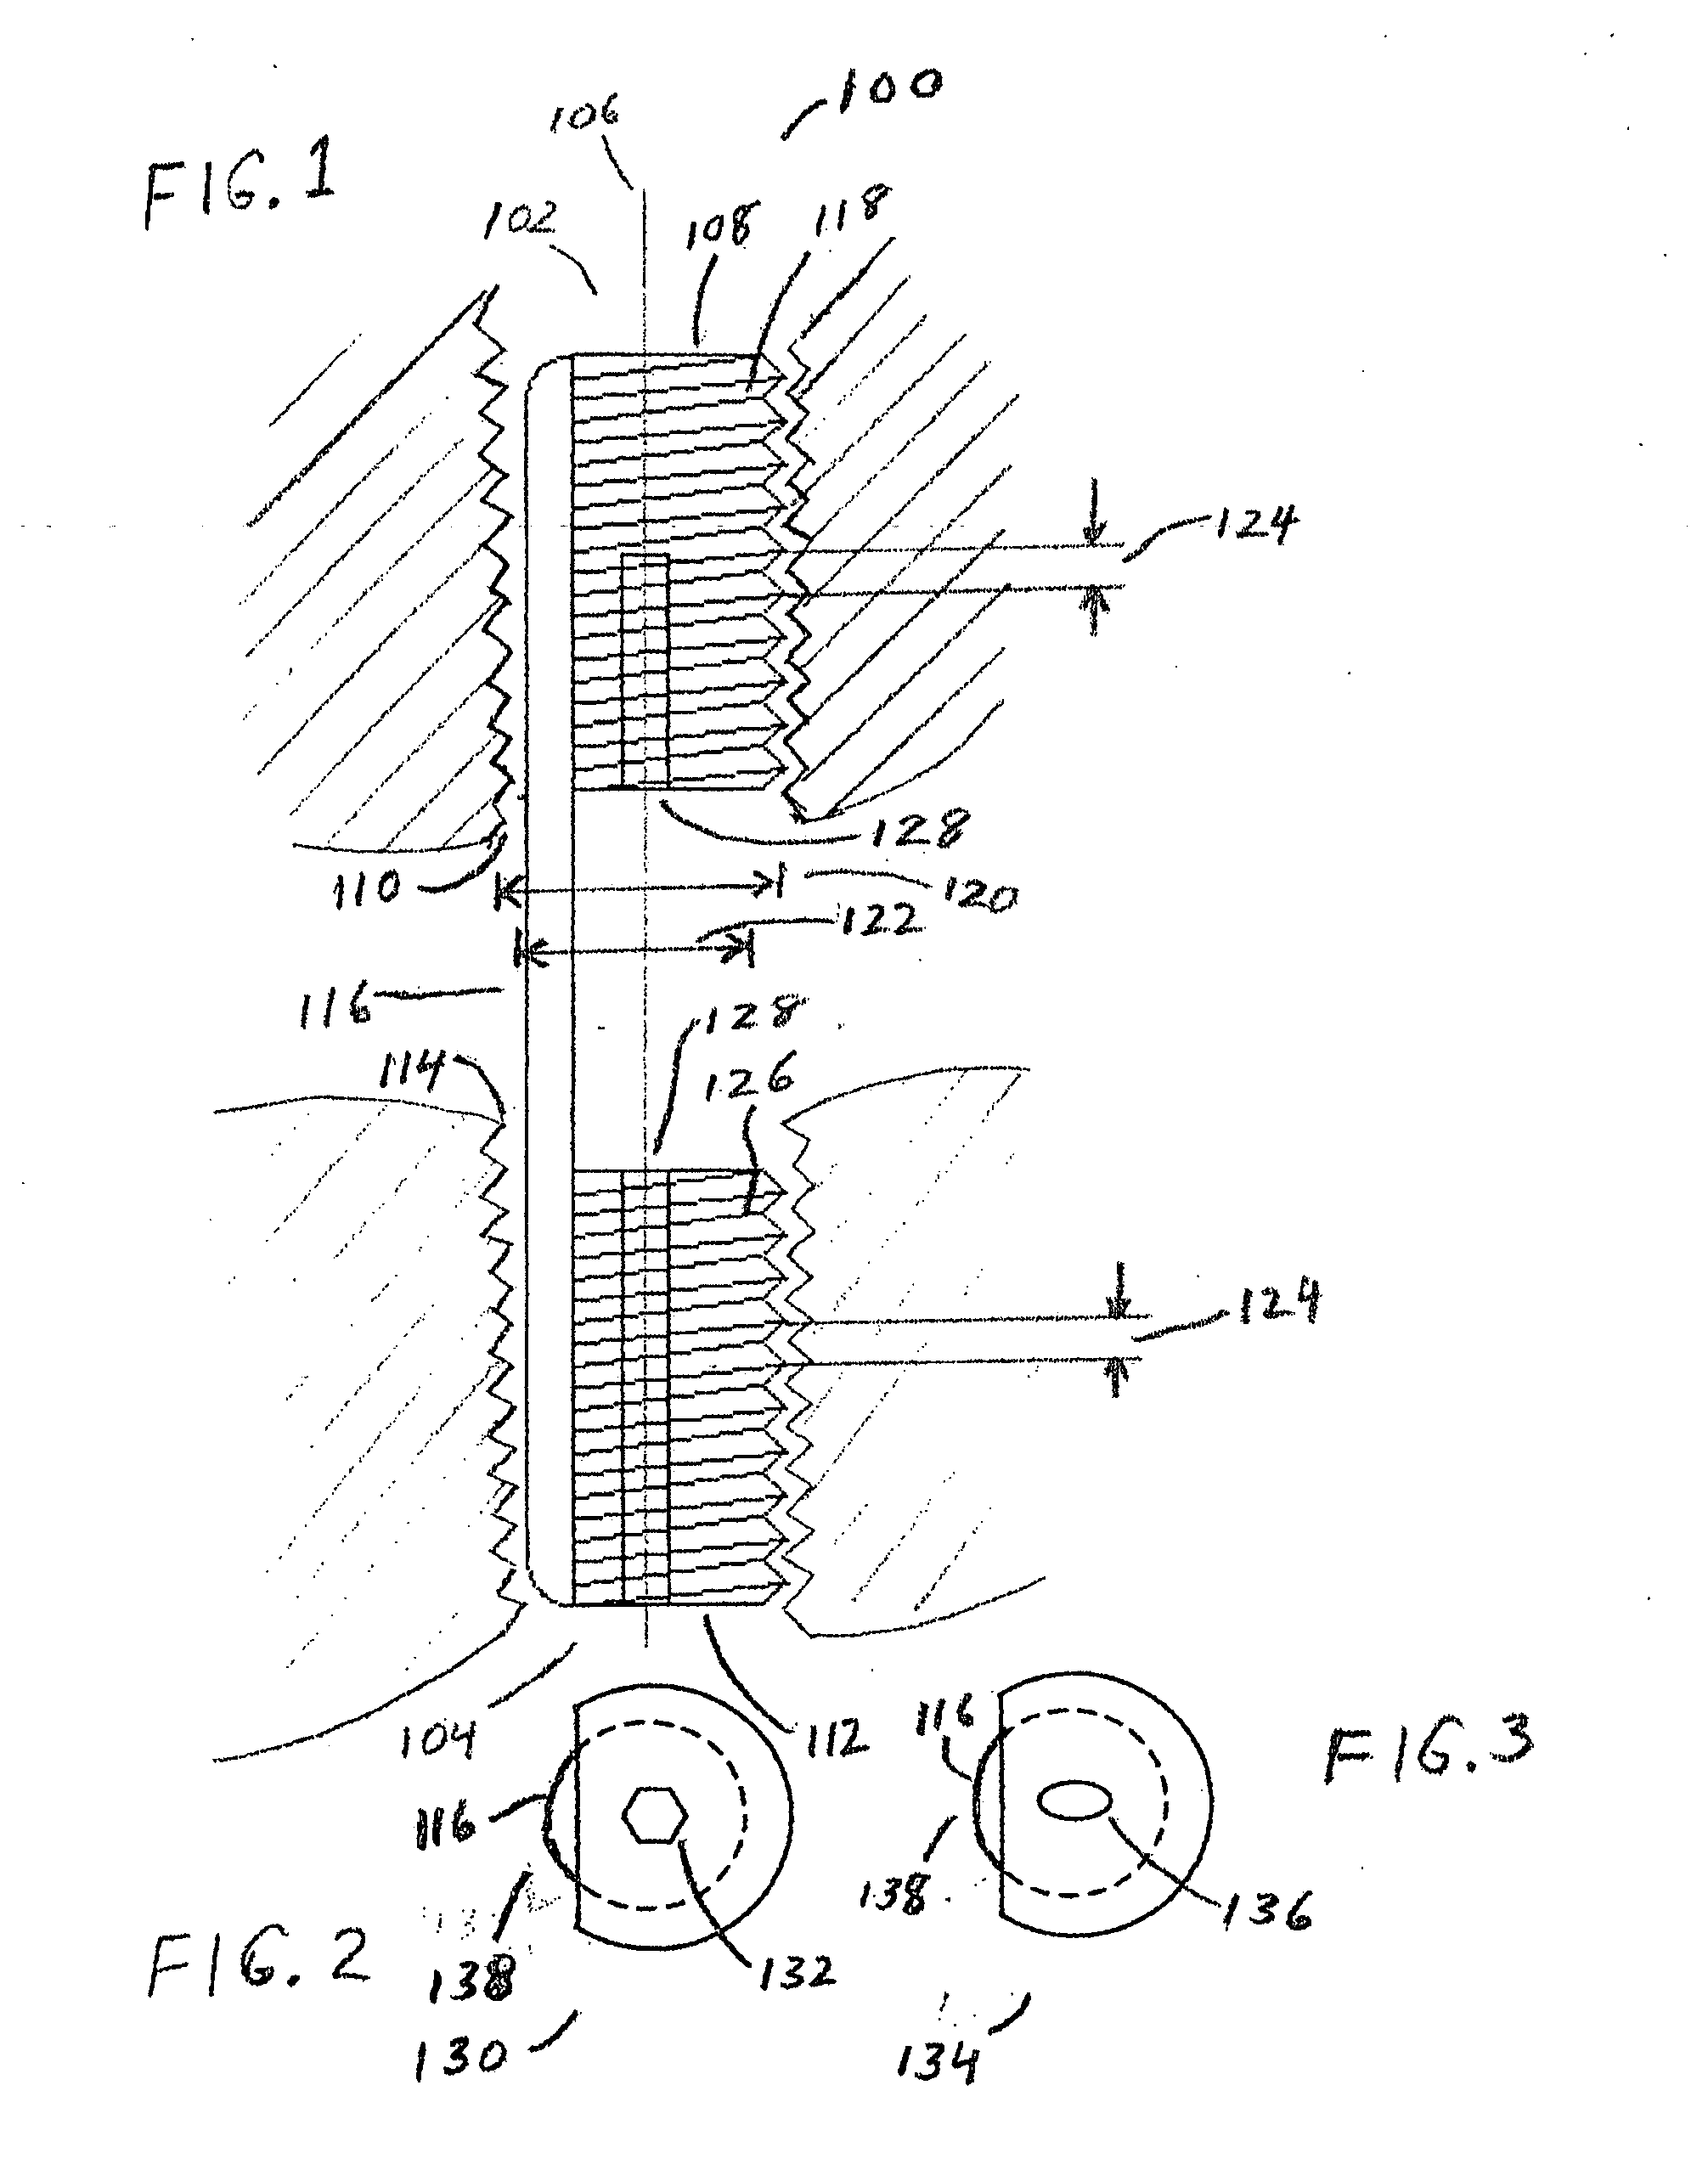 Arthroscopic implants with integral fixation devices and method for use